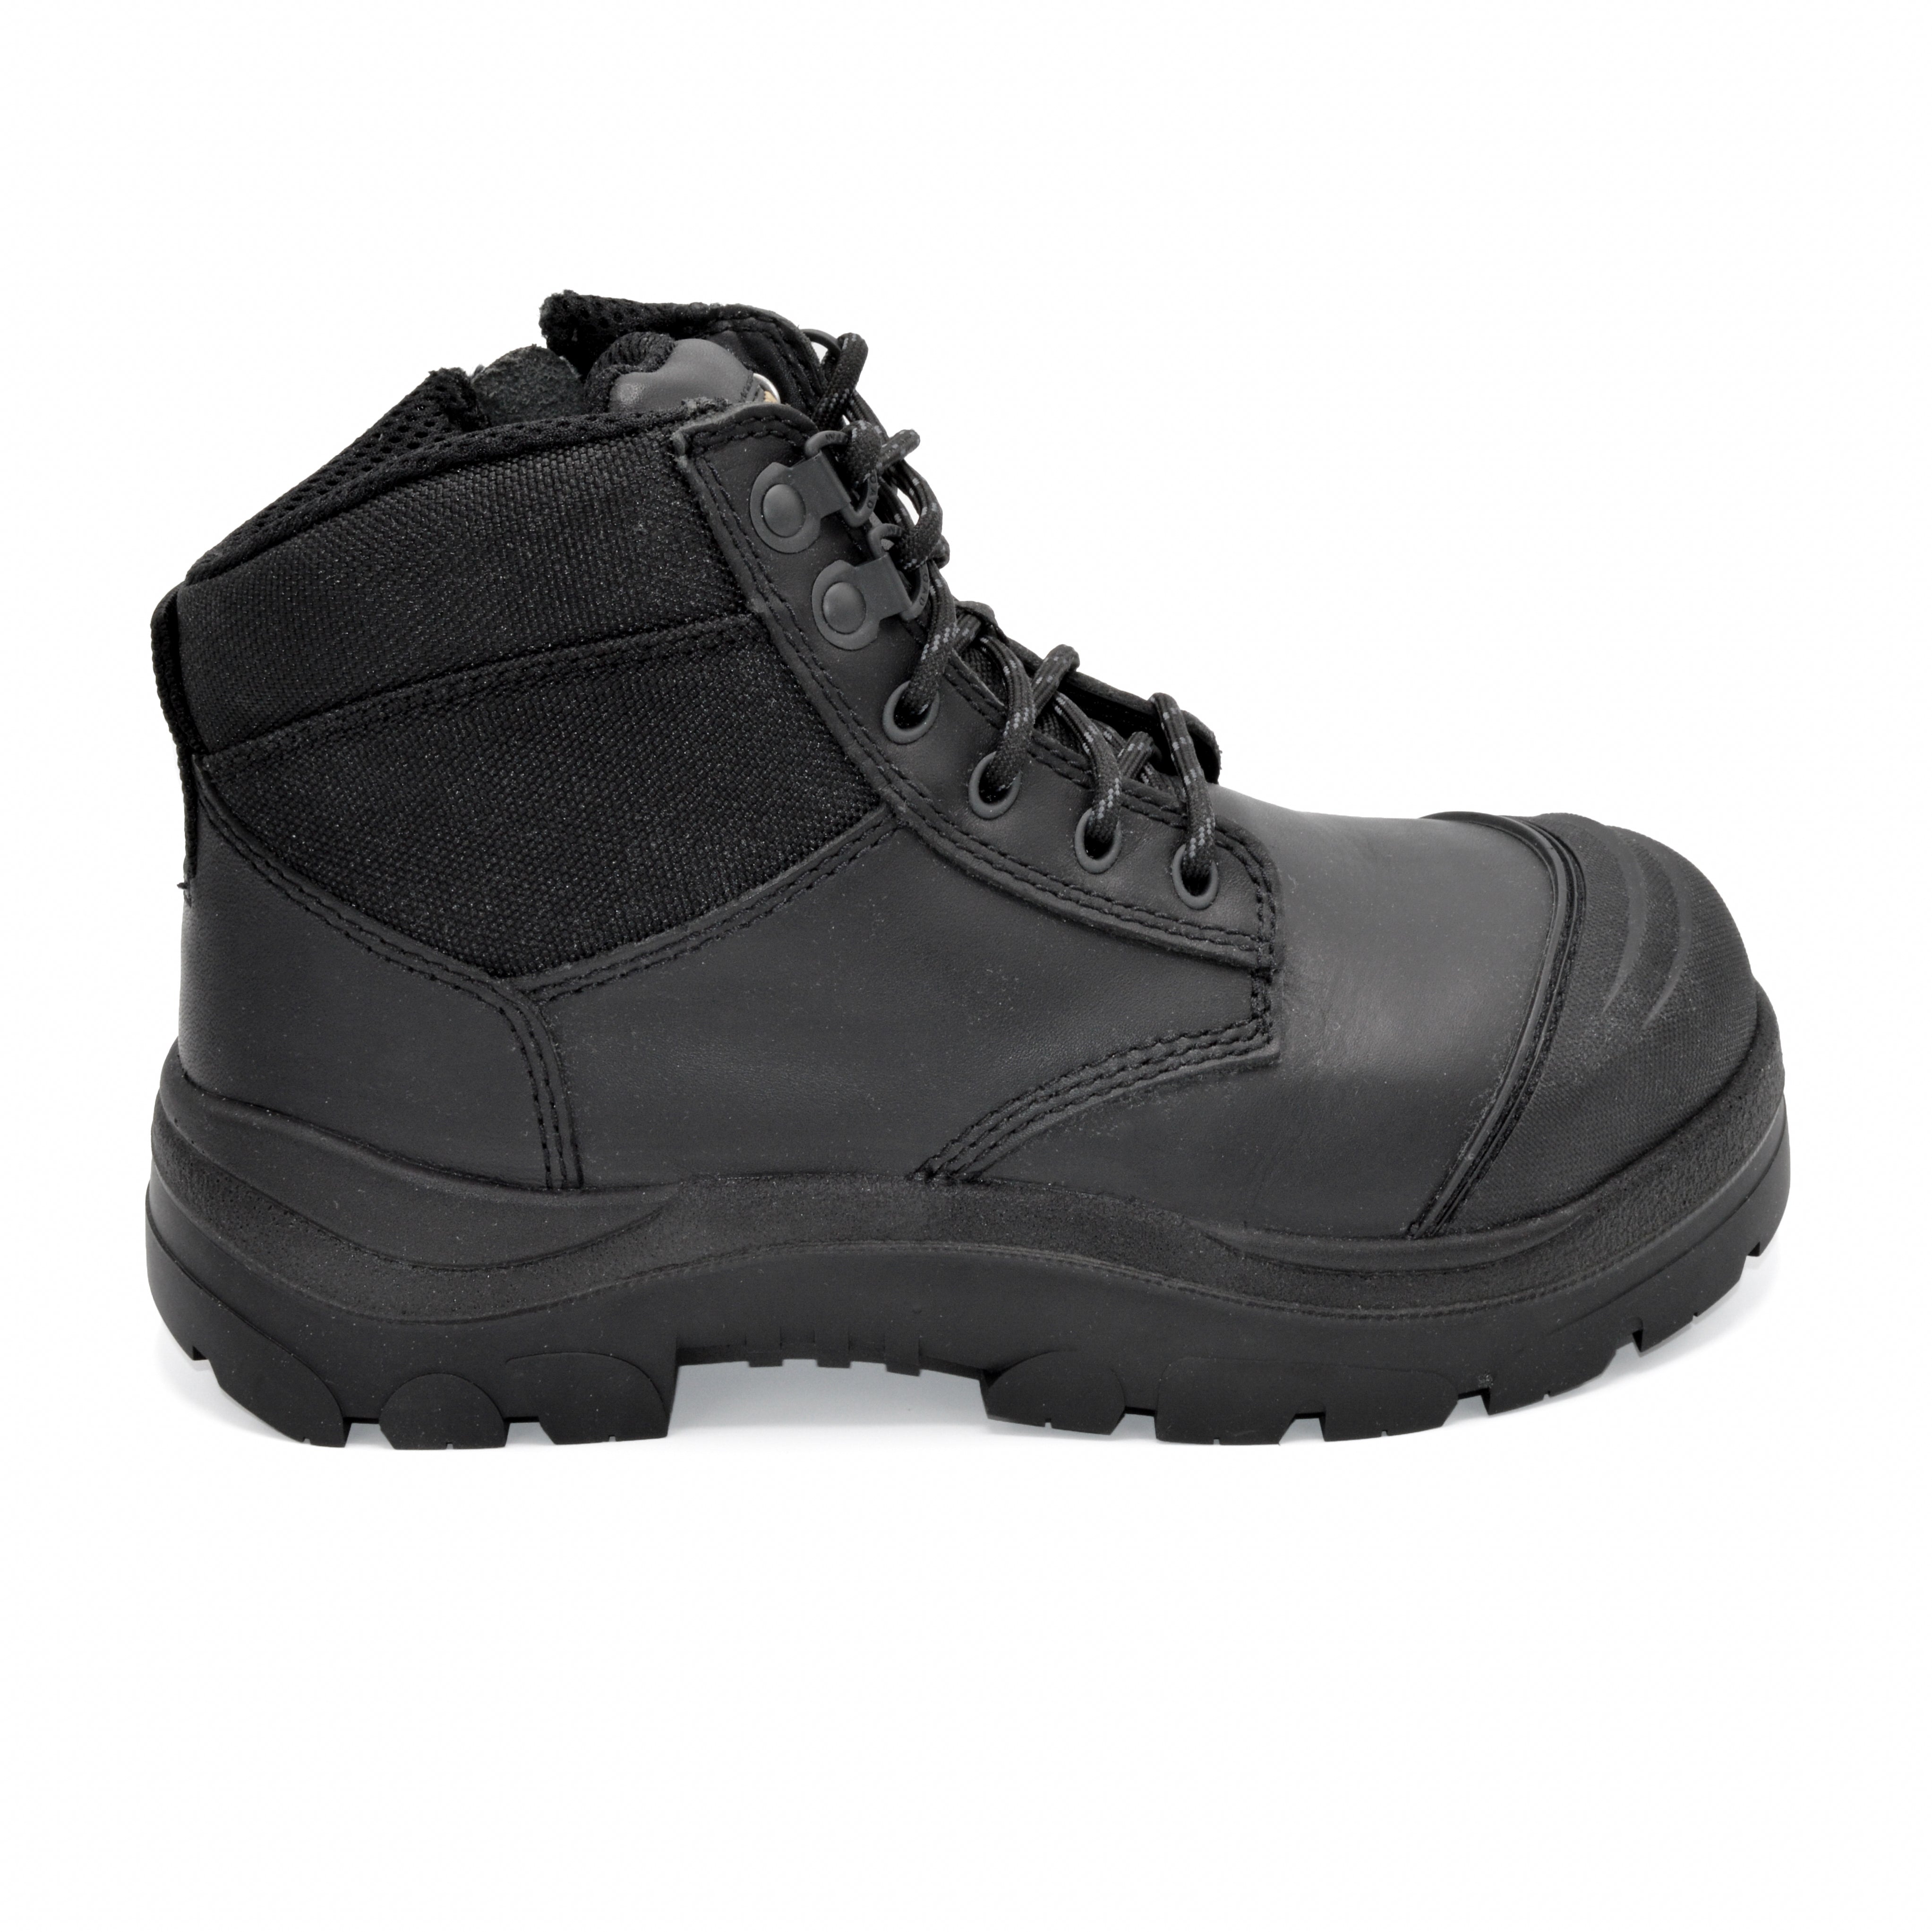 Wideload Mens Extra Wide Safety Boot